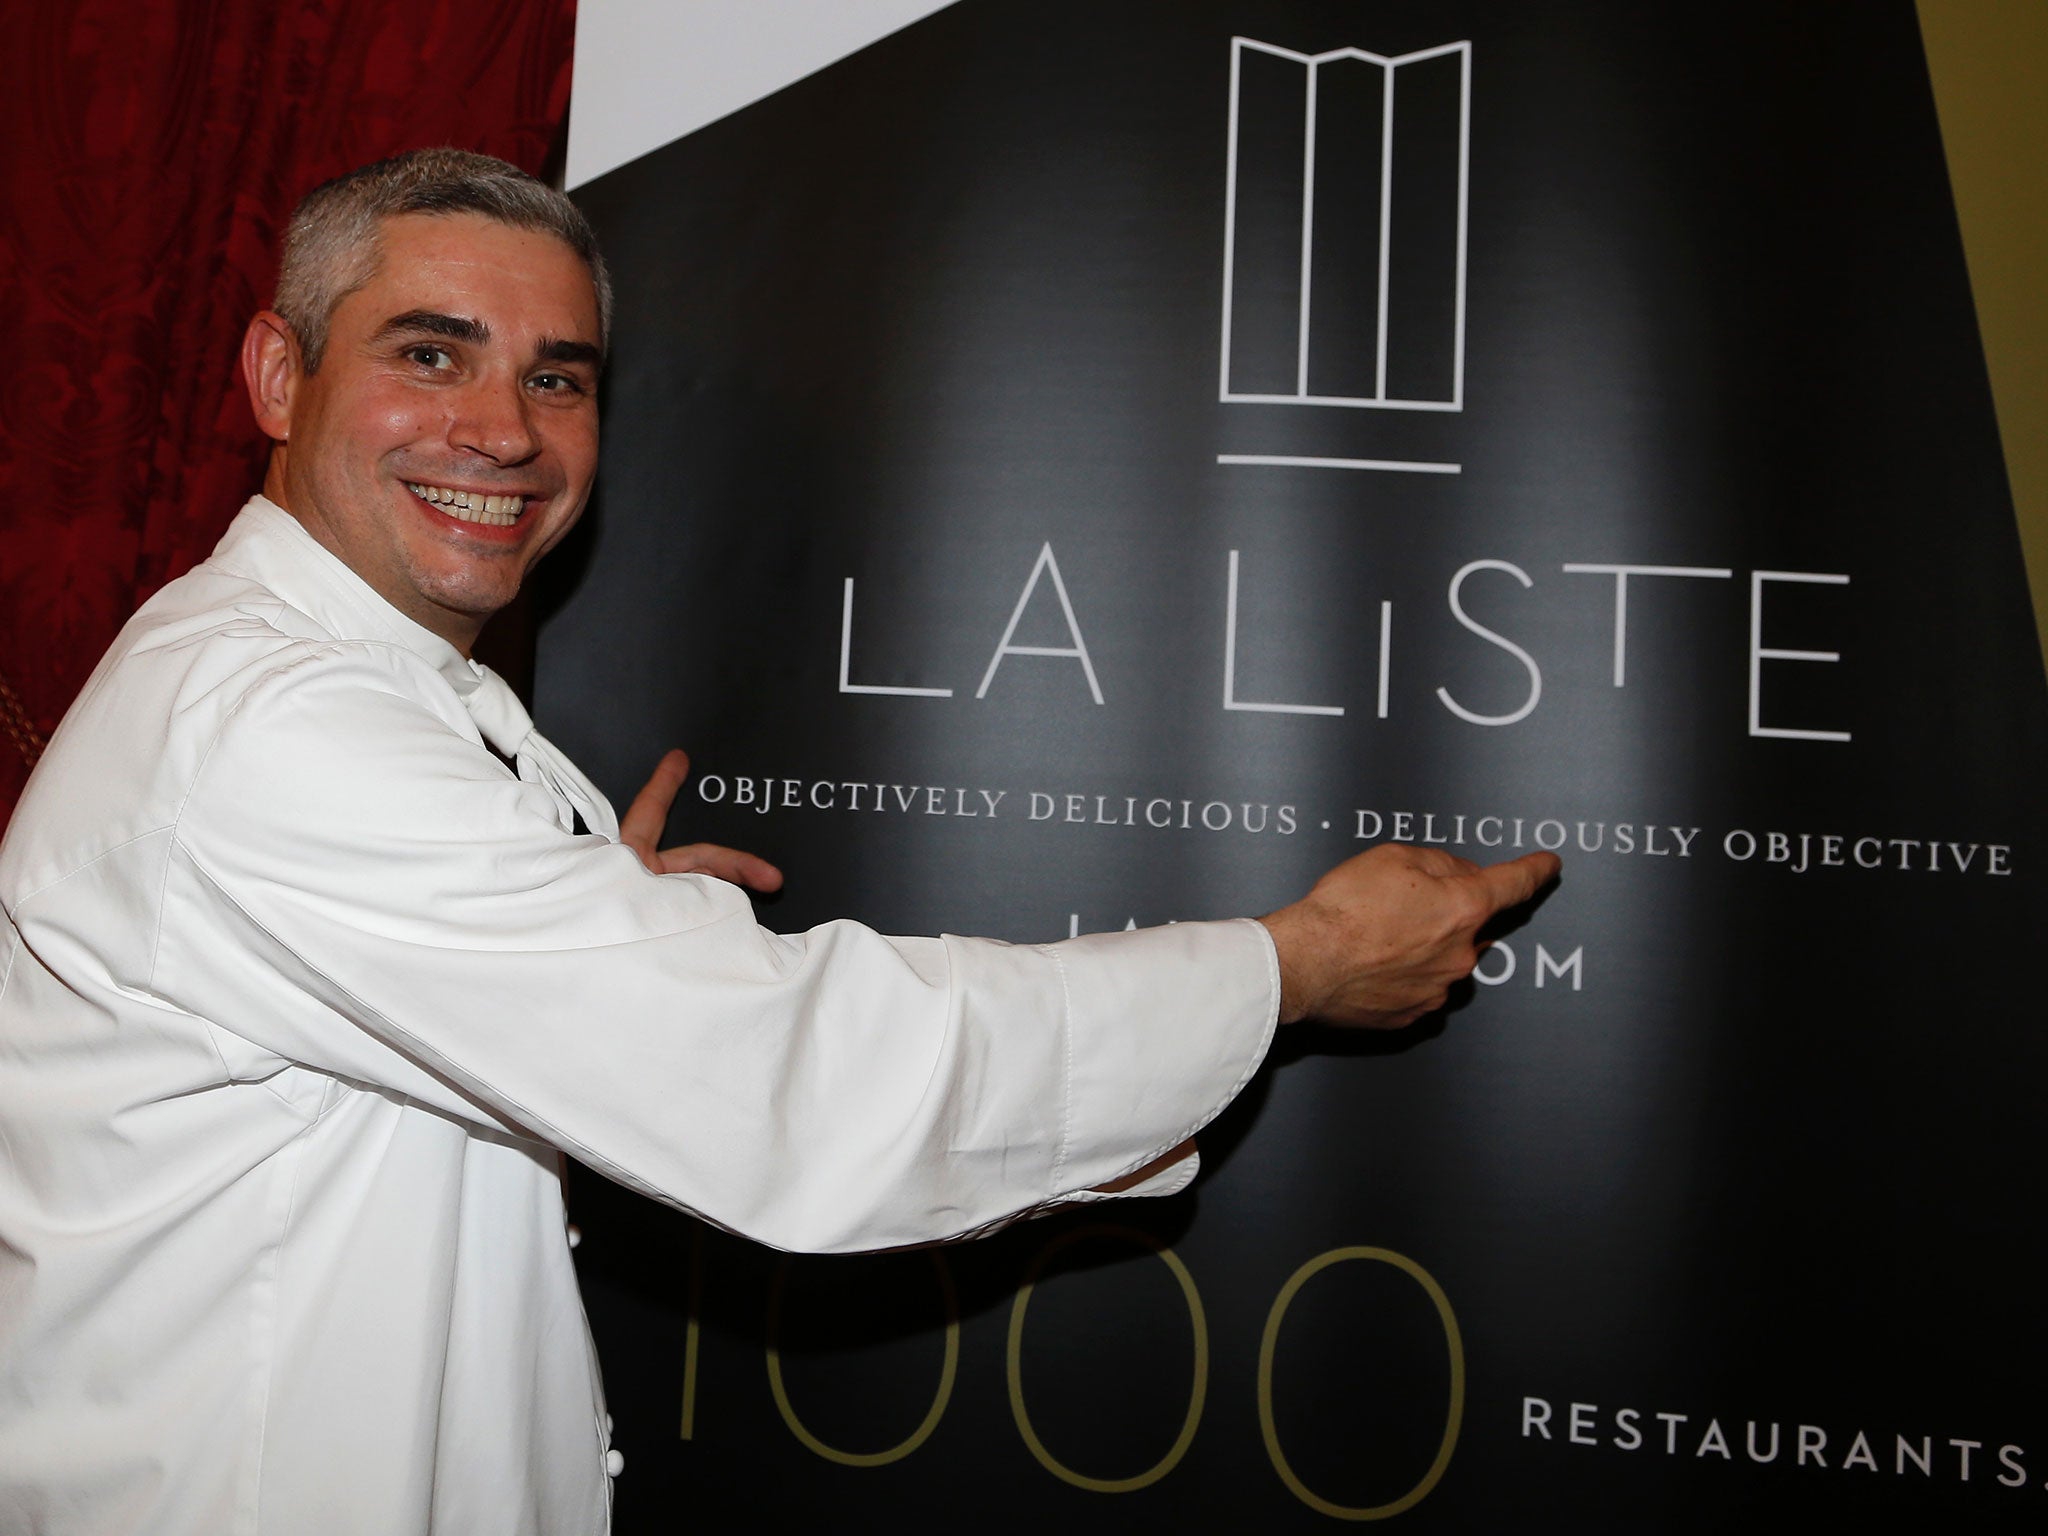 Benoit Violier poses for a photo after being awarded First restaurant of La Liste Award in Paris on 17 December, 2015